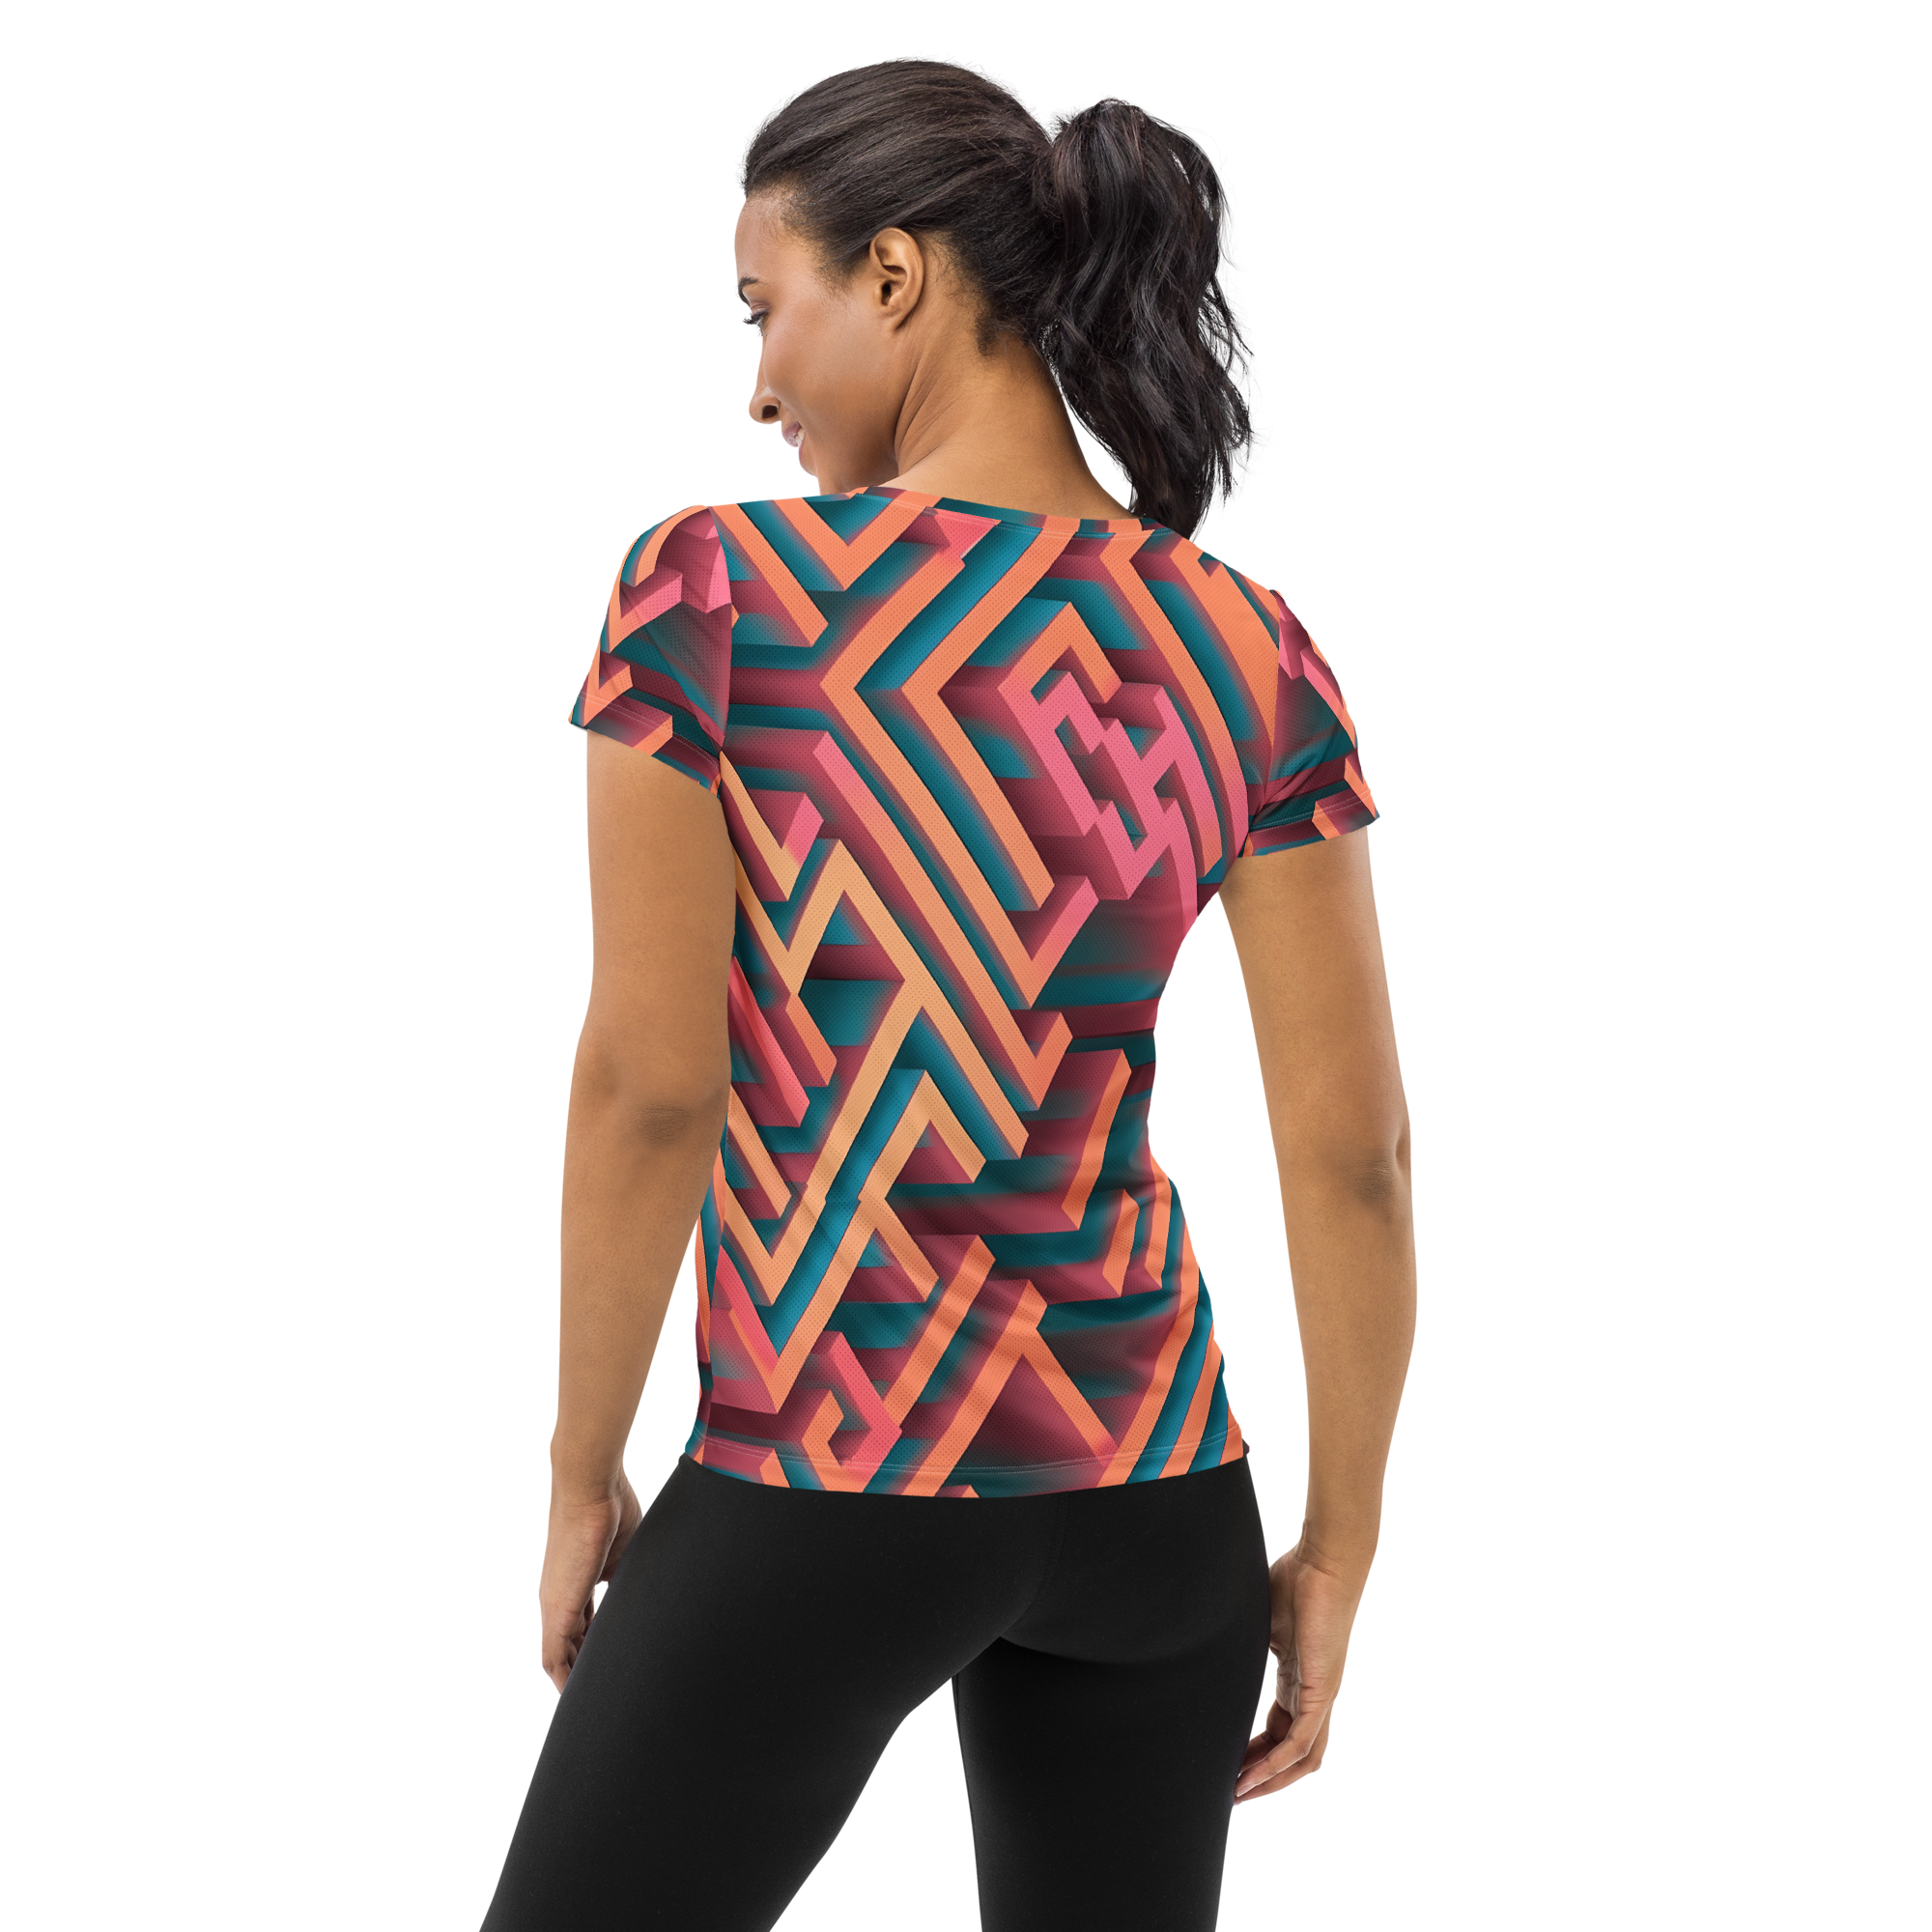 3D Maze Illusion | 3D Patterns | All-Over Print Women's Athletic T-Shirt - #1